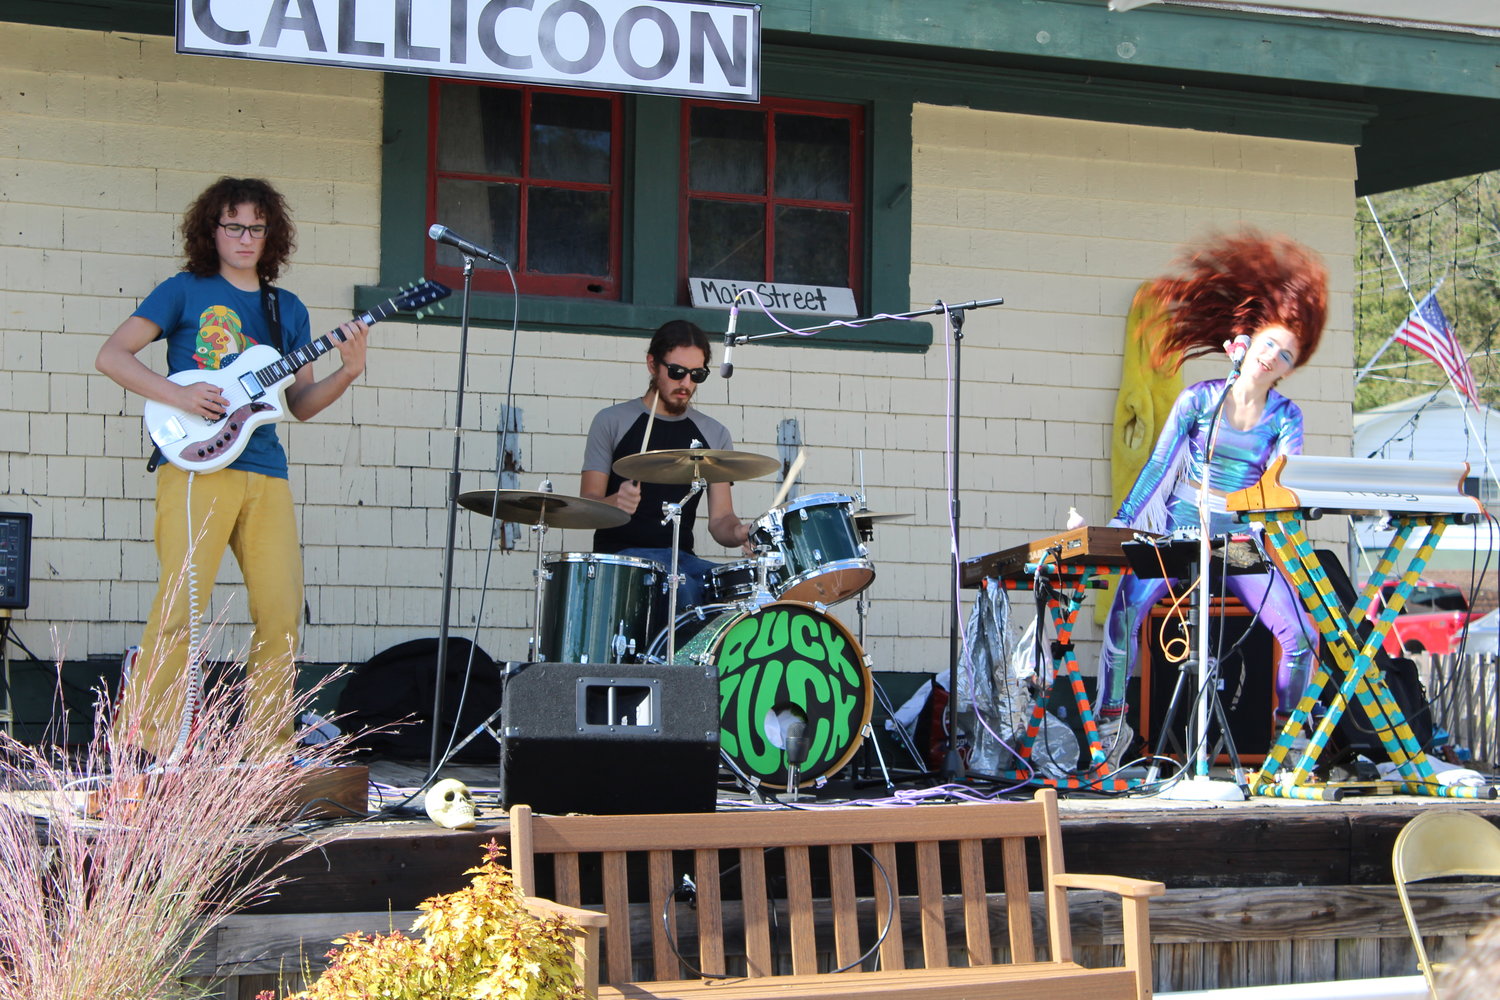 Ruckzuck, the Pocono-area band’s edgier, compelling, psychedelic sound, takes over the Callicoon Train Station porch in Callicoon as one of 50 performers for the annual Porchfet...